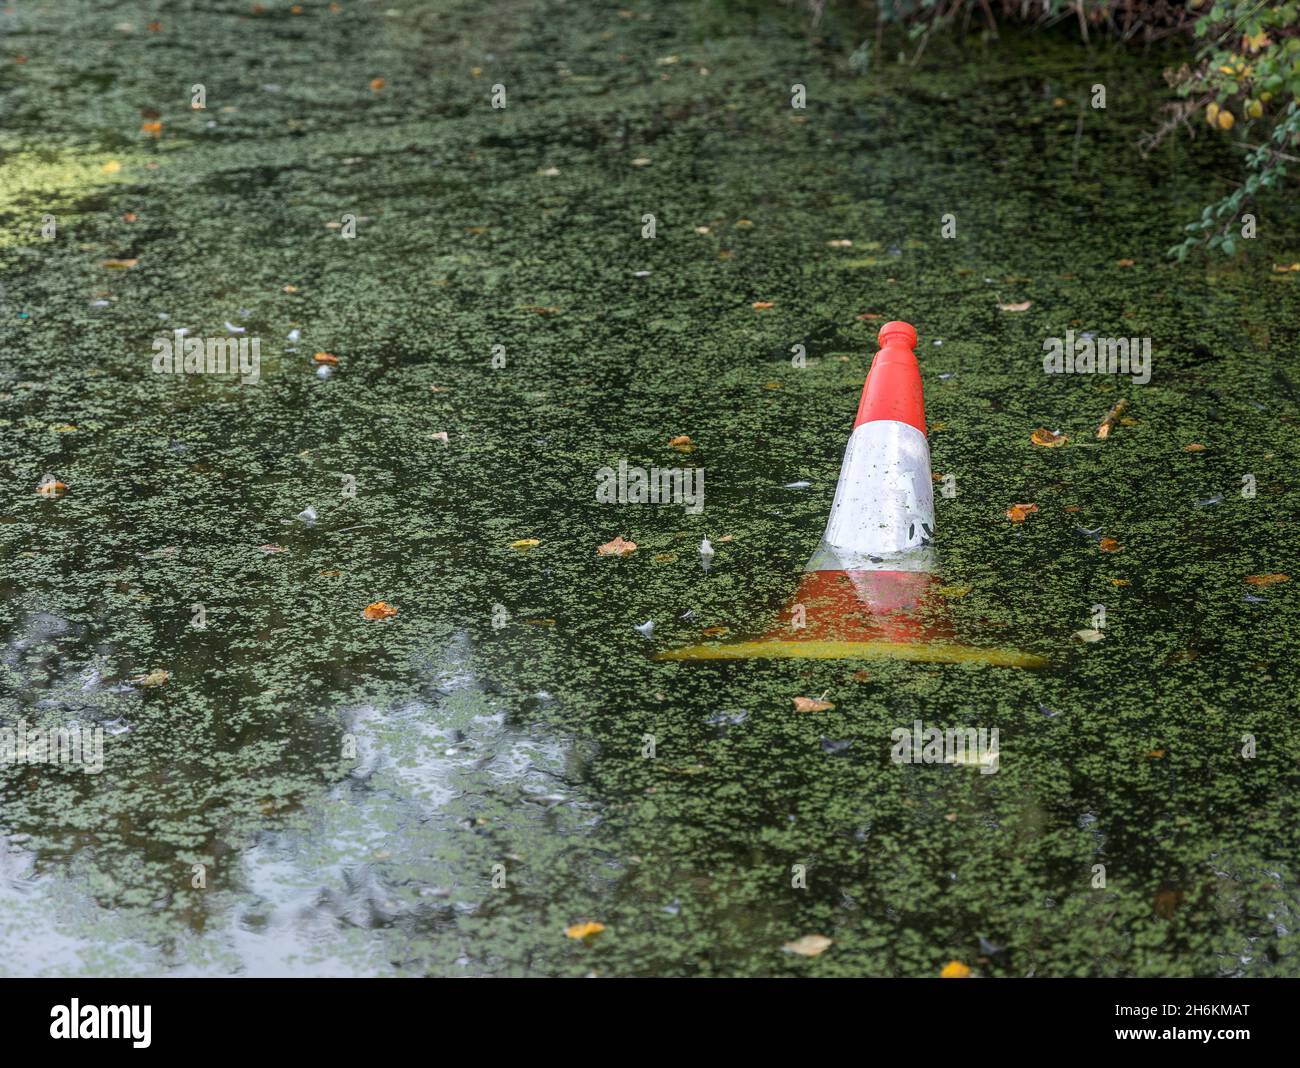 Red and white traffic cone floating in water with pond vegetation Stock Photo